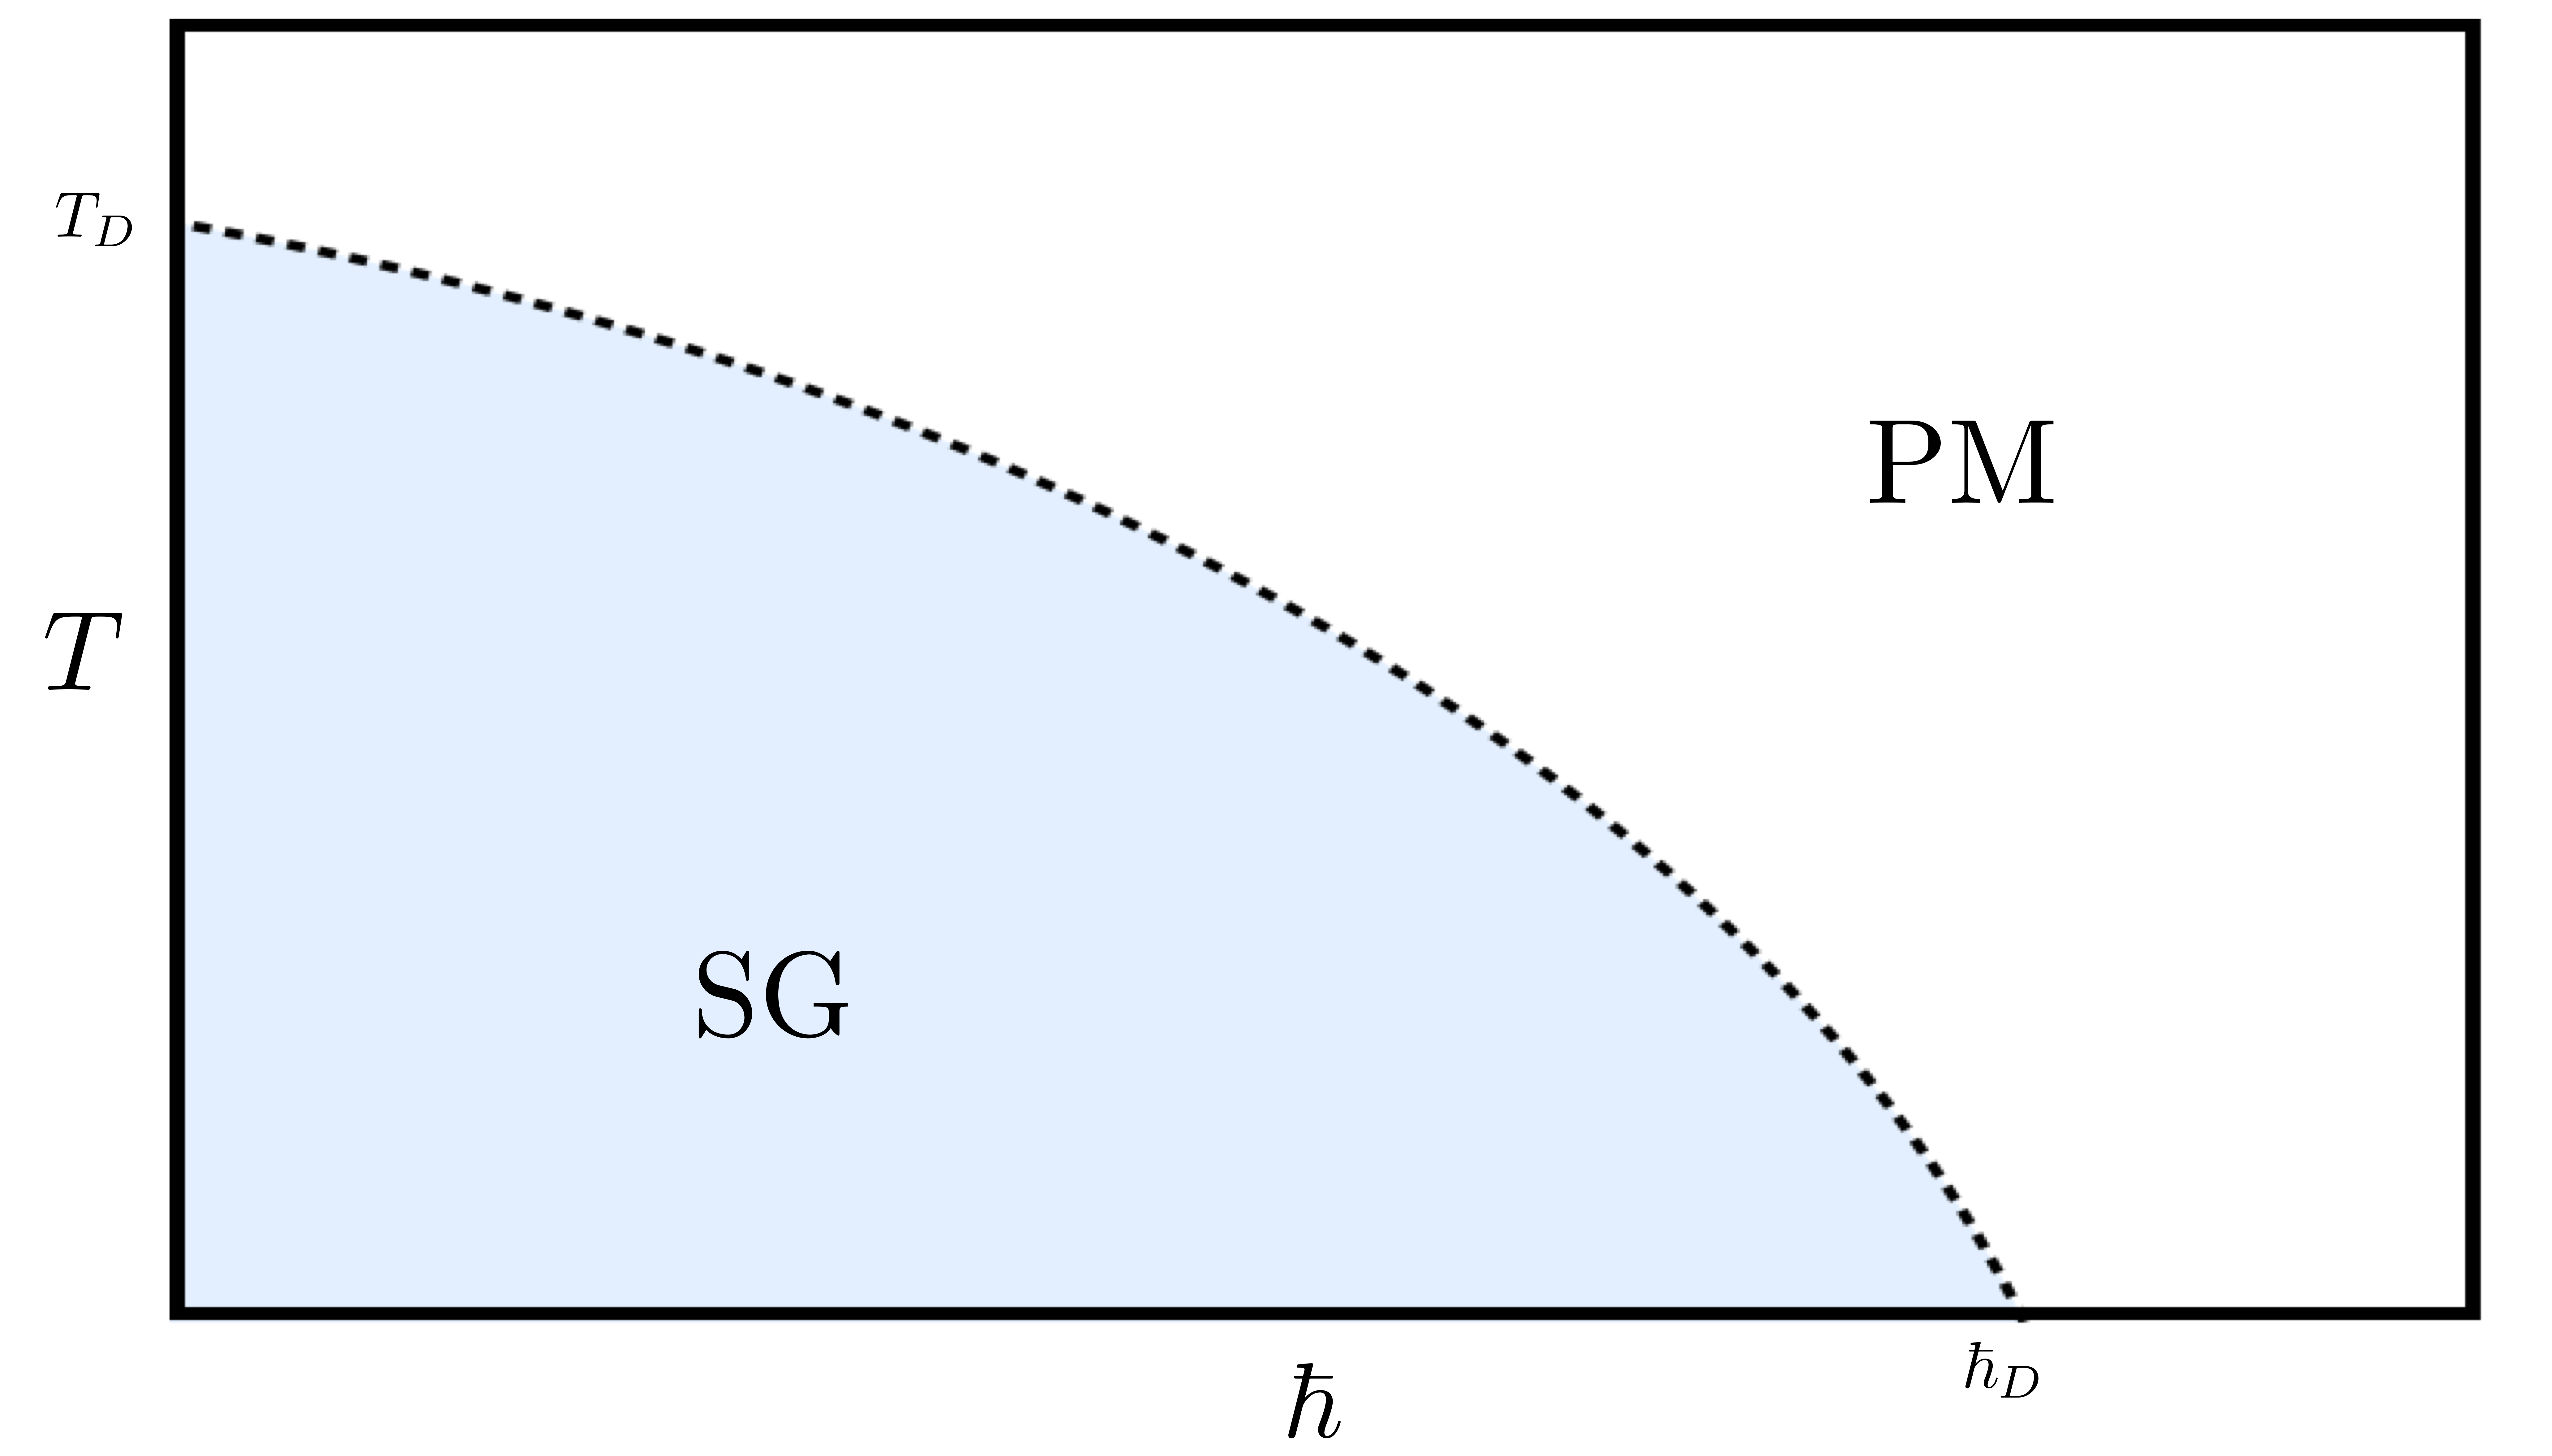 A phase diagram of the p-spin model, showing the spin glass phase (SG, in blue) that exists at low temperatures T and small values of quantum fluctuations.